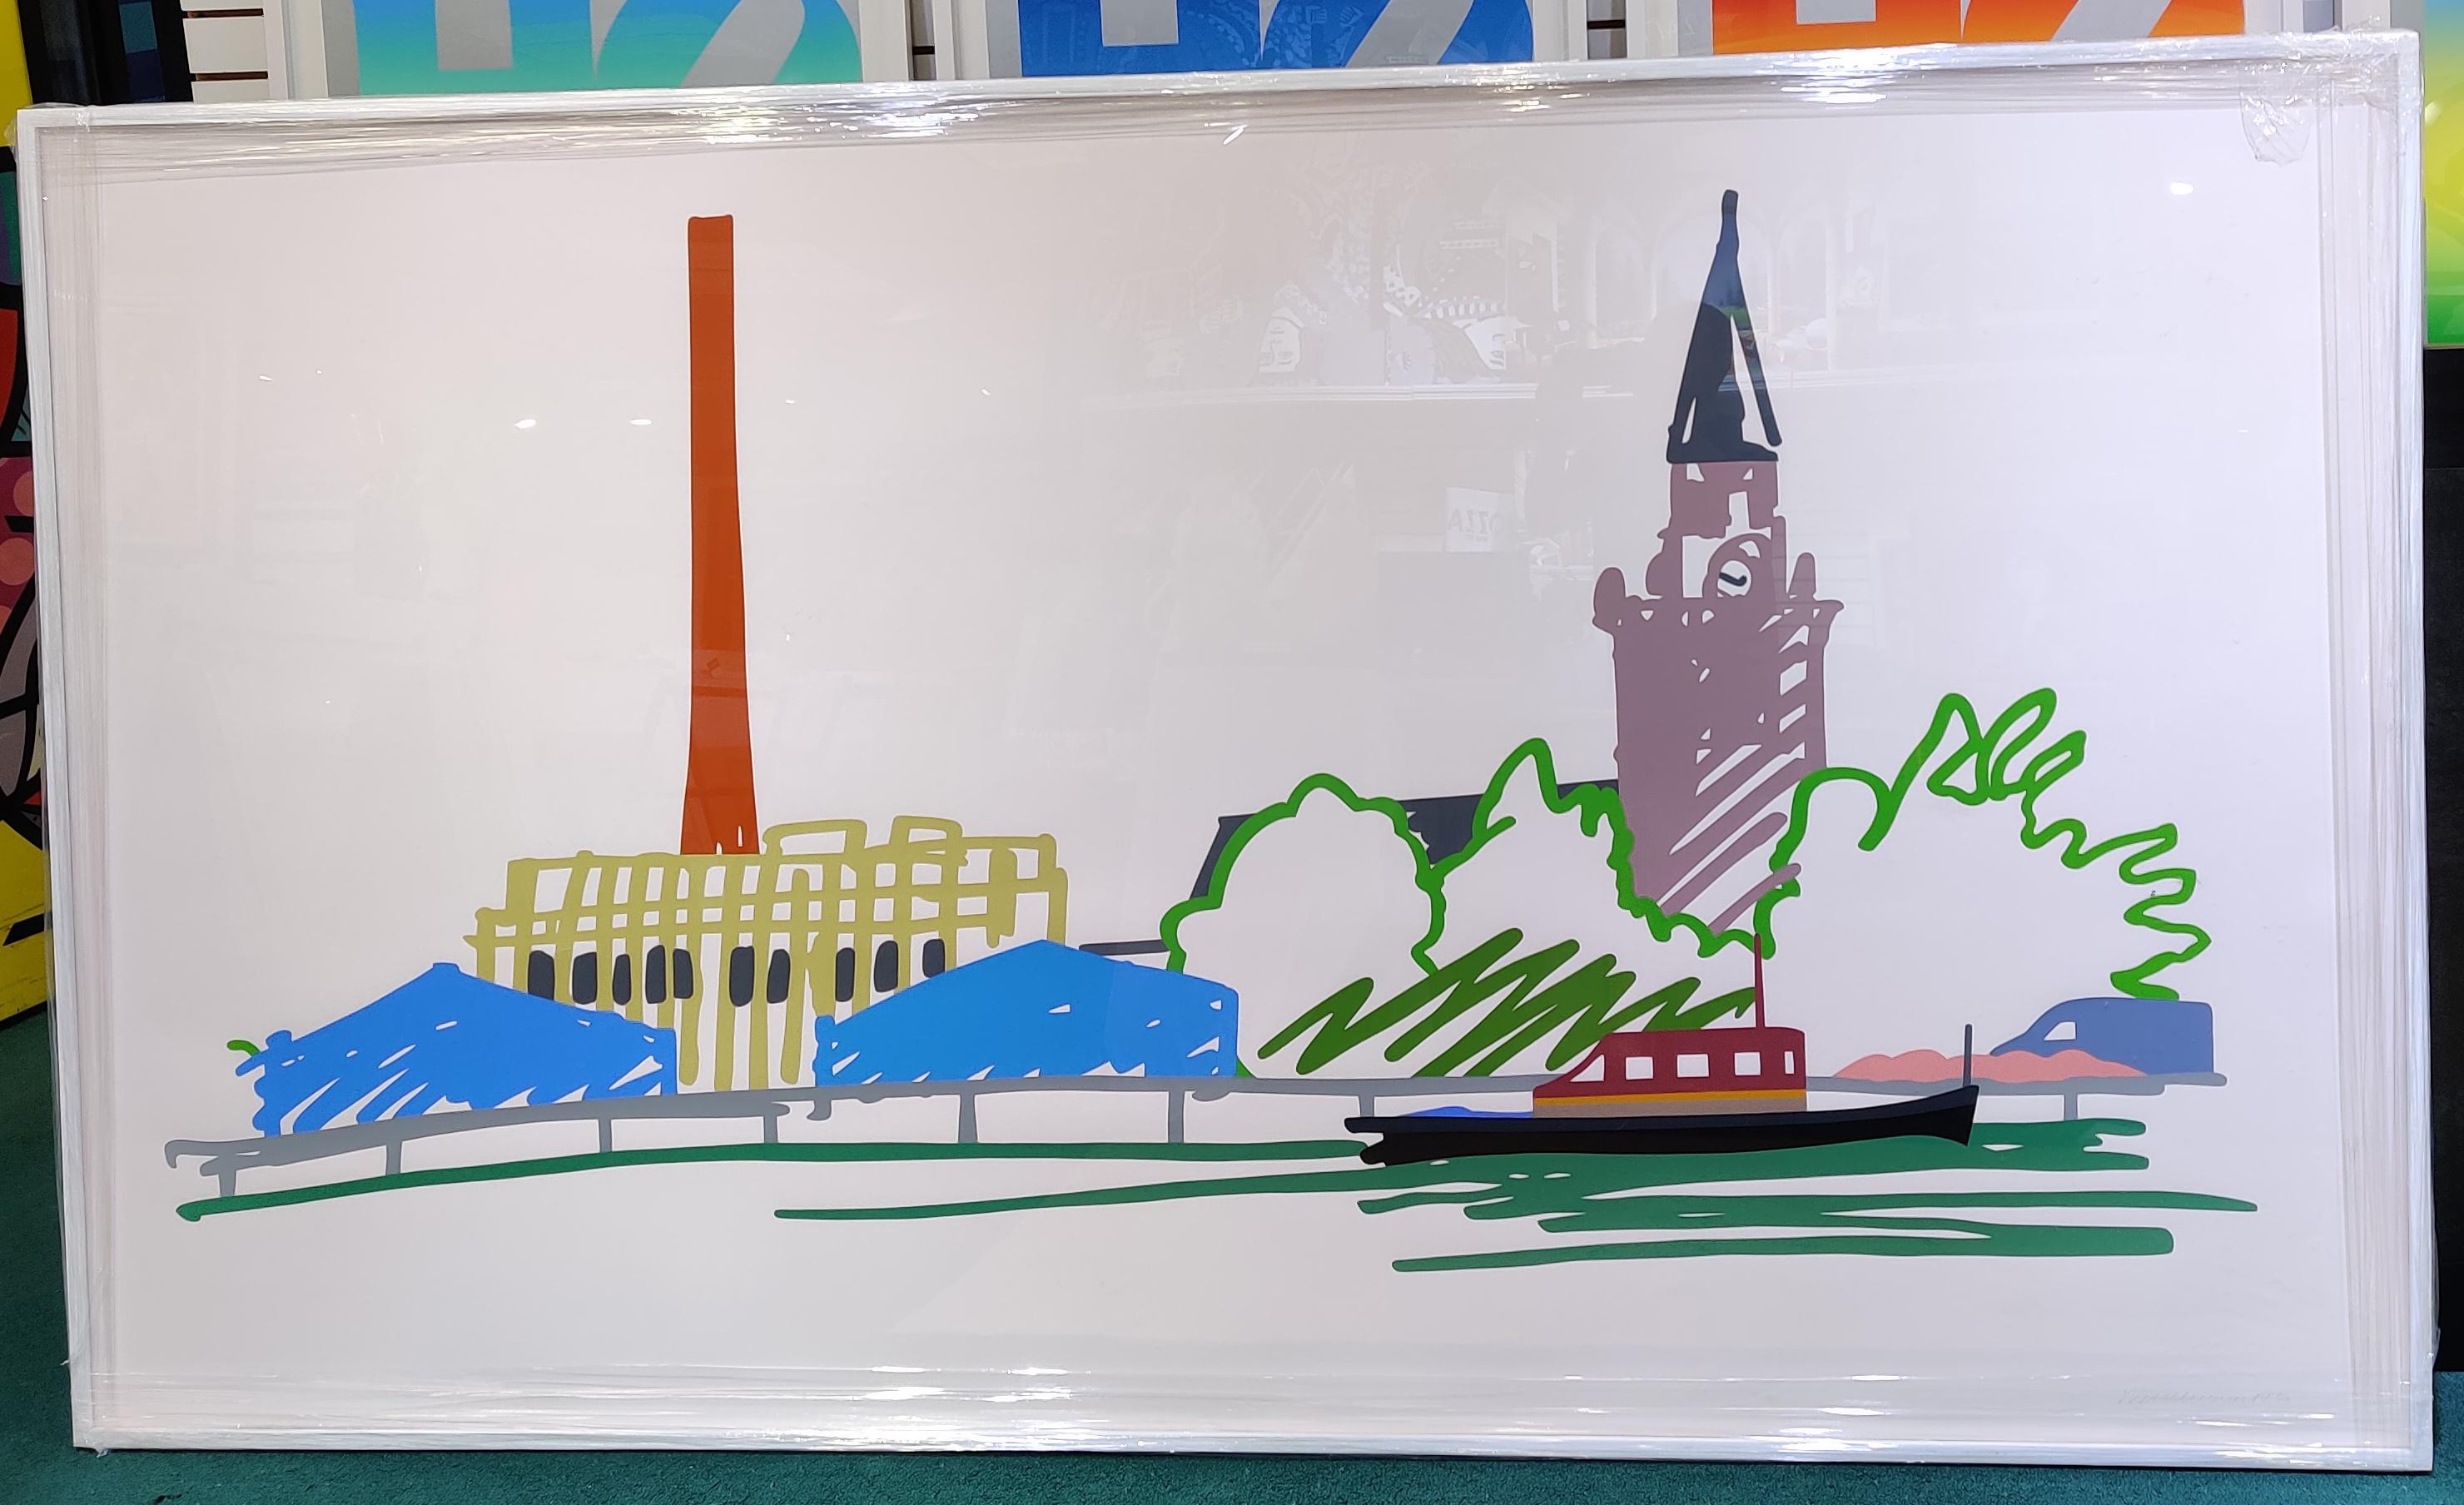 THAMES SCENE WITH POWER STATION - Print by Tom Wesselmann